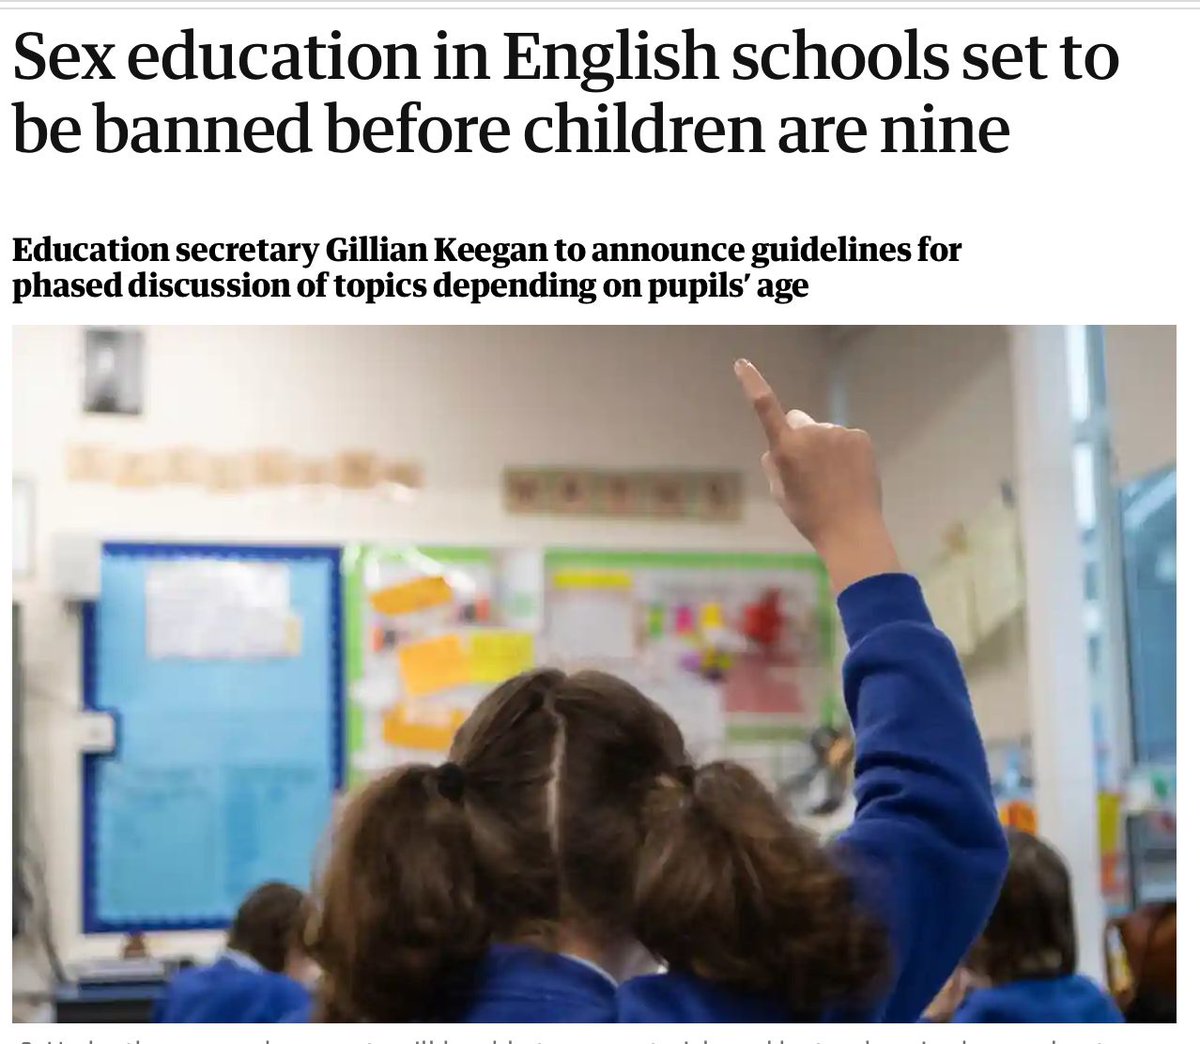 Sex education in English schools set to be banned before children are nine, reports The Graun. Reminder of Section 28 Tories passed a law in 1988 to stop councils & schools from 'promoting the teaching of the acceptability of homosexuality as a pretended family relationship.'